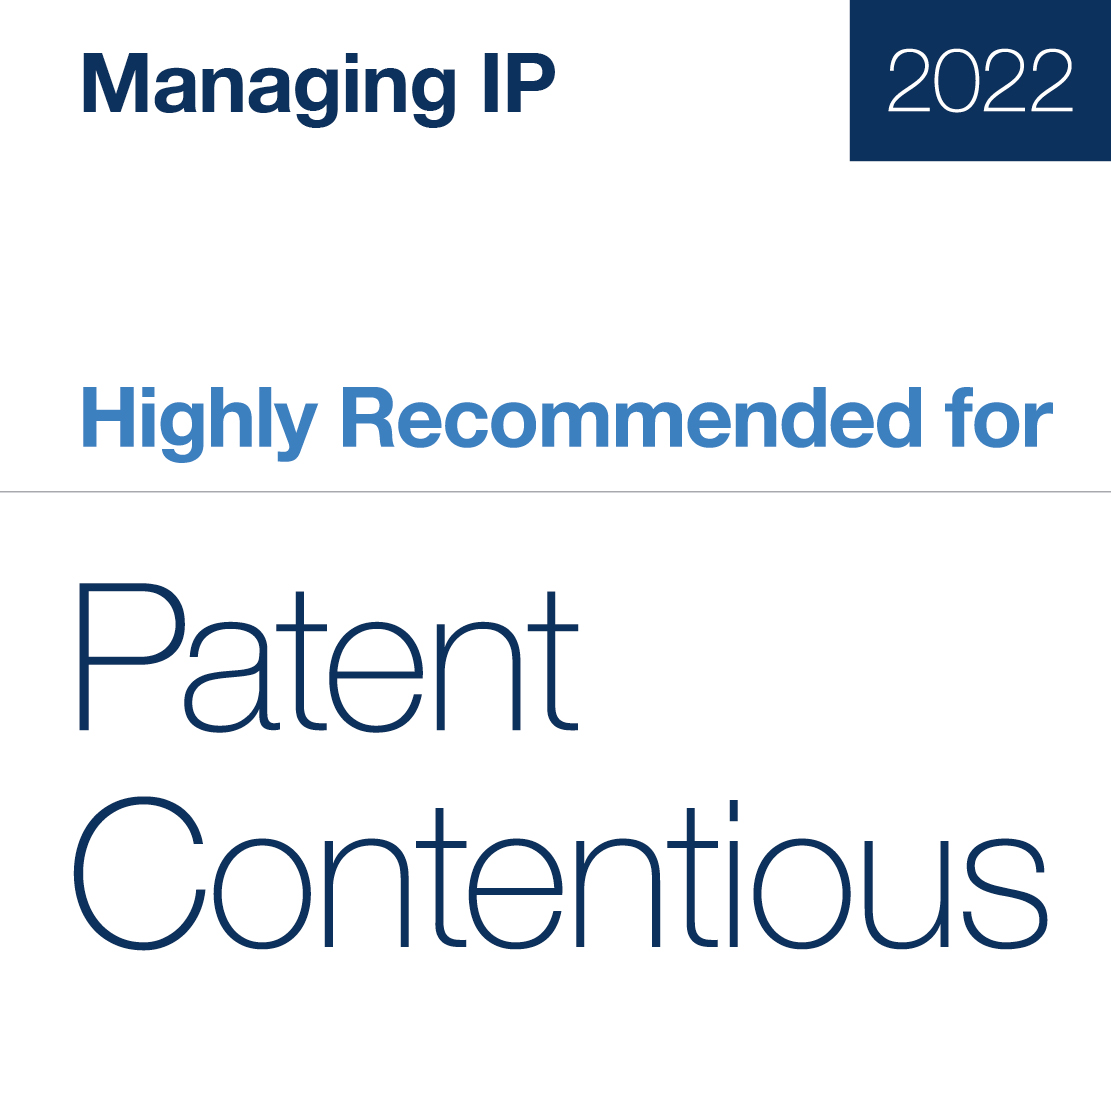 Highly Recommended for Patent Contentious 2022